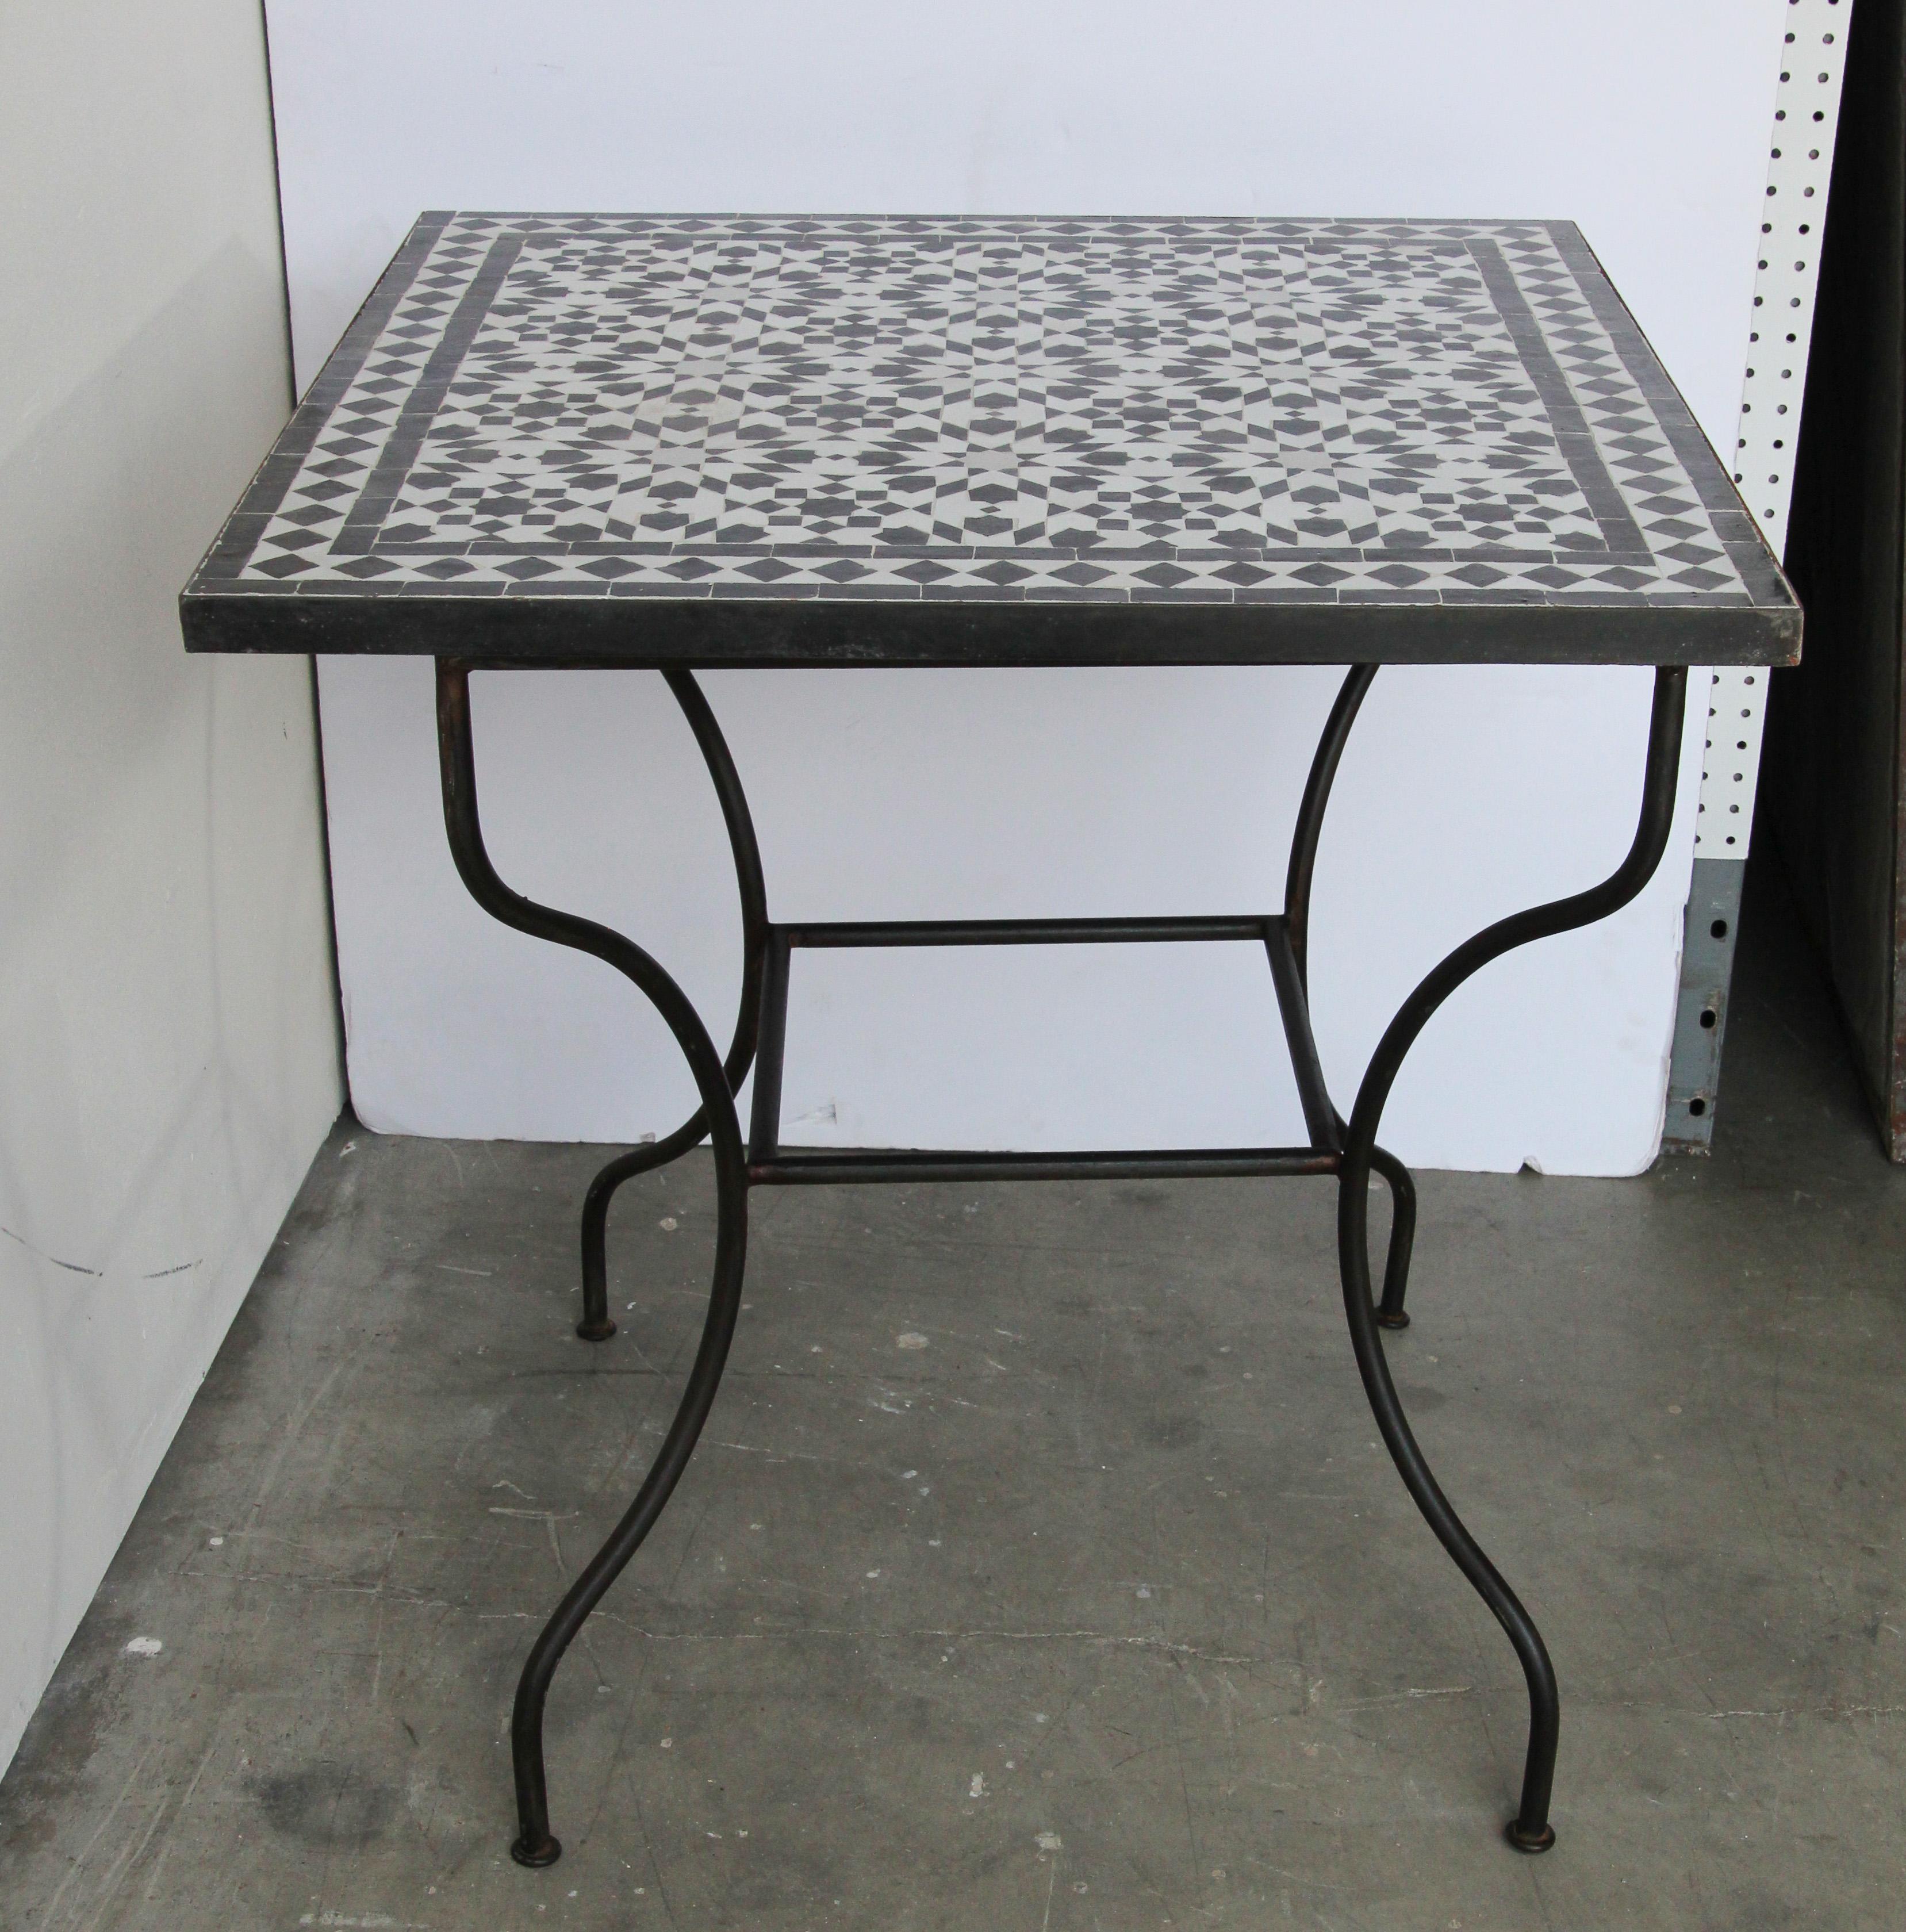 Moroccan mosaic Fez tiles table on iron base.
Handmade by expert artisans in Fez, Morocco using reclaimed old glazed black and white colors tiles inlaid in concrete and making beautiful geometrical Moorish Fez designs, colors are black and white,